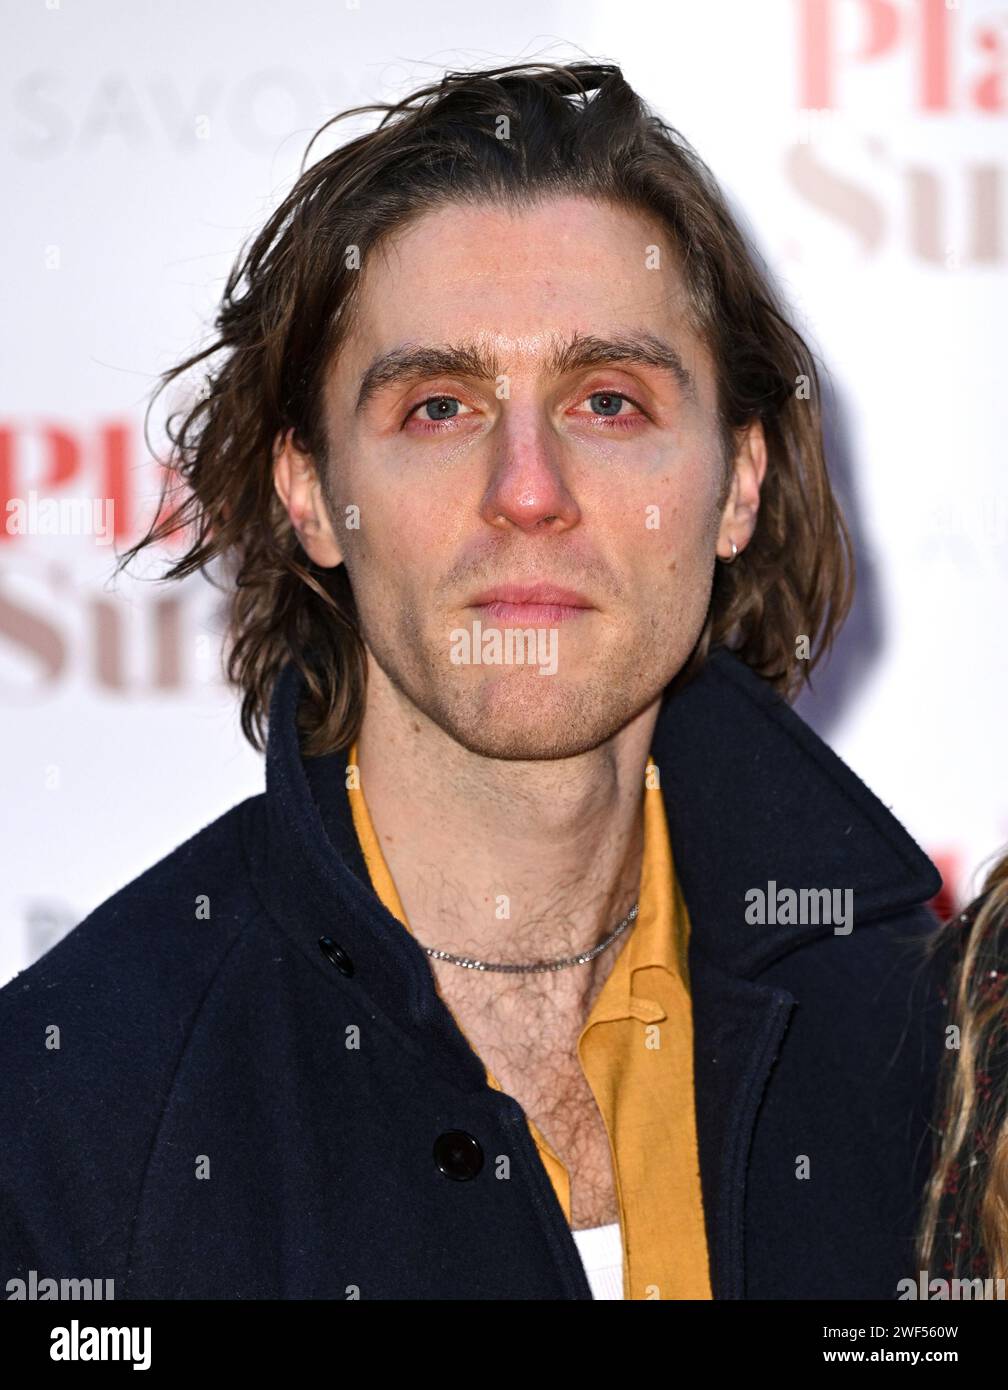 London, UK. January 28th, 2024. Jack Farthing arriving at the gala performance of Plaza Suite, the Savoy Theatre, London. Credit: Doug Peters/EMPICS/Alamy Live News Stock Photo